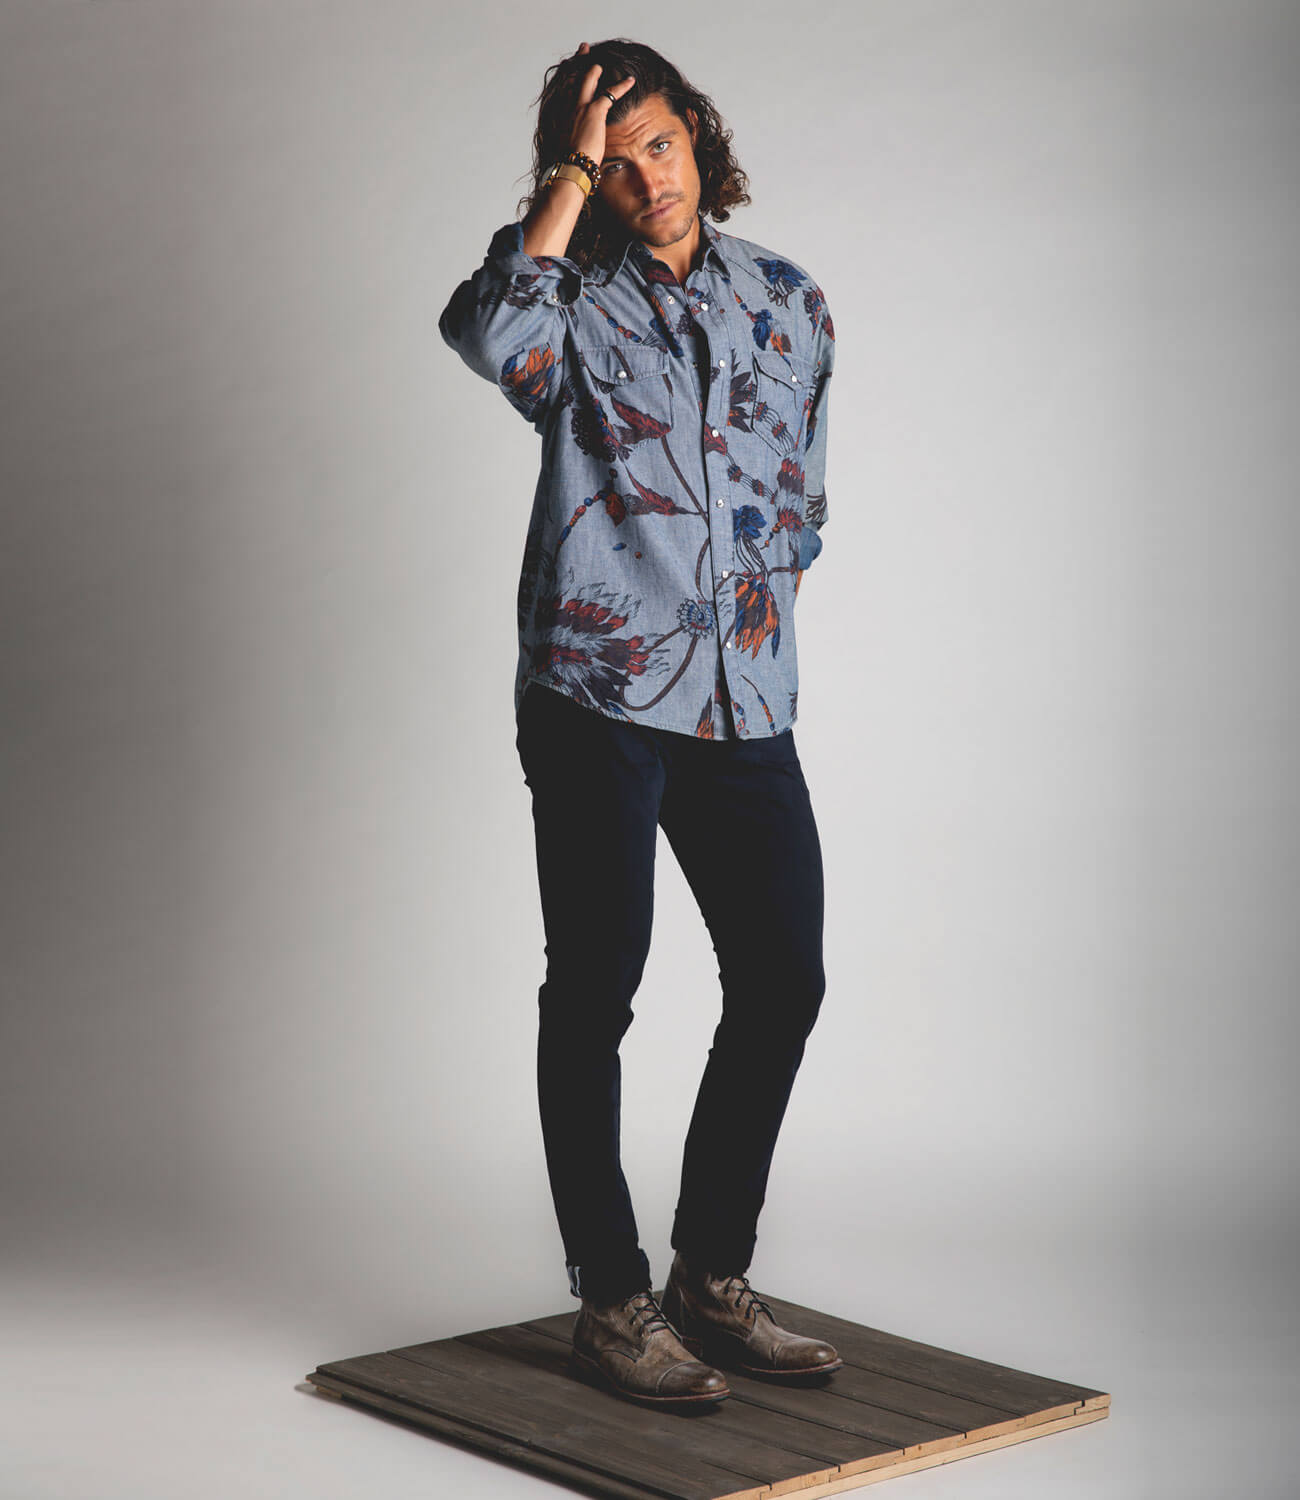 A man in a floral shirt, blue jeans, and Bed Stu Protege boots while standing on a wooden platform.